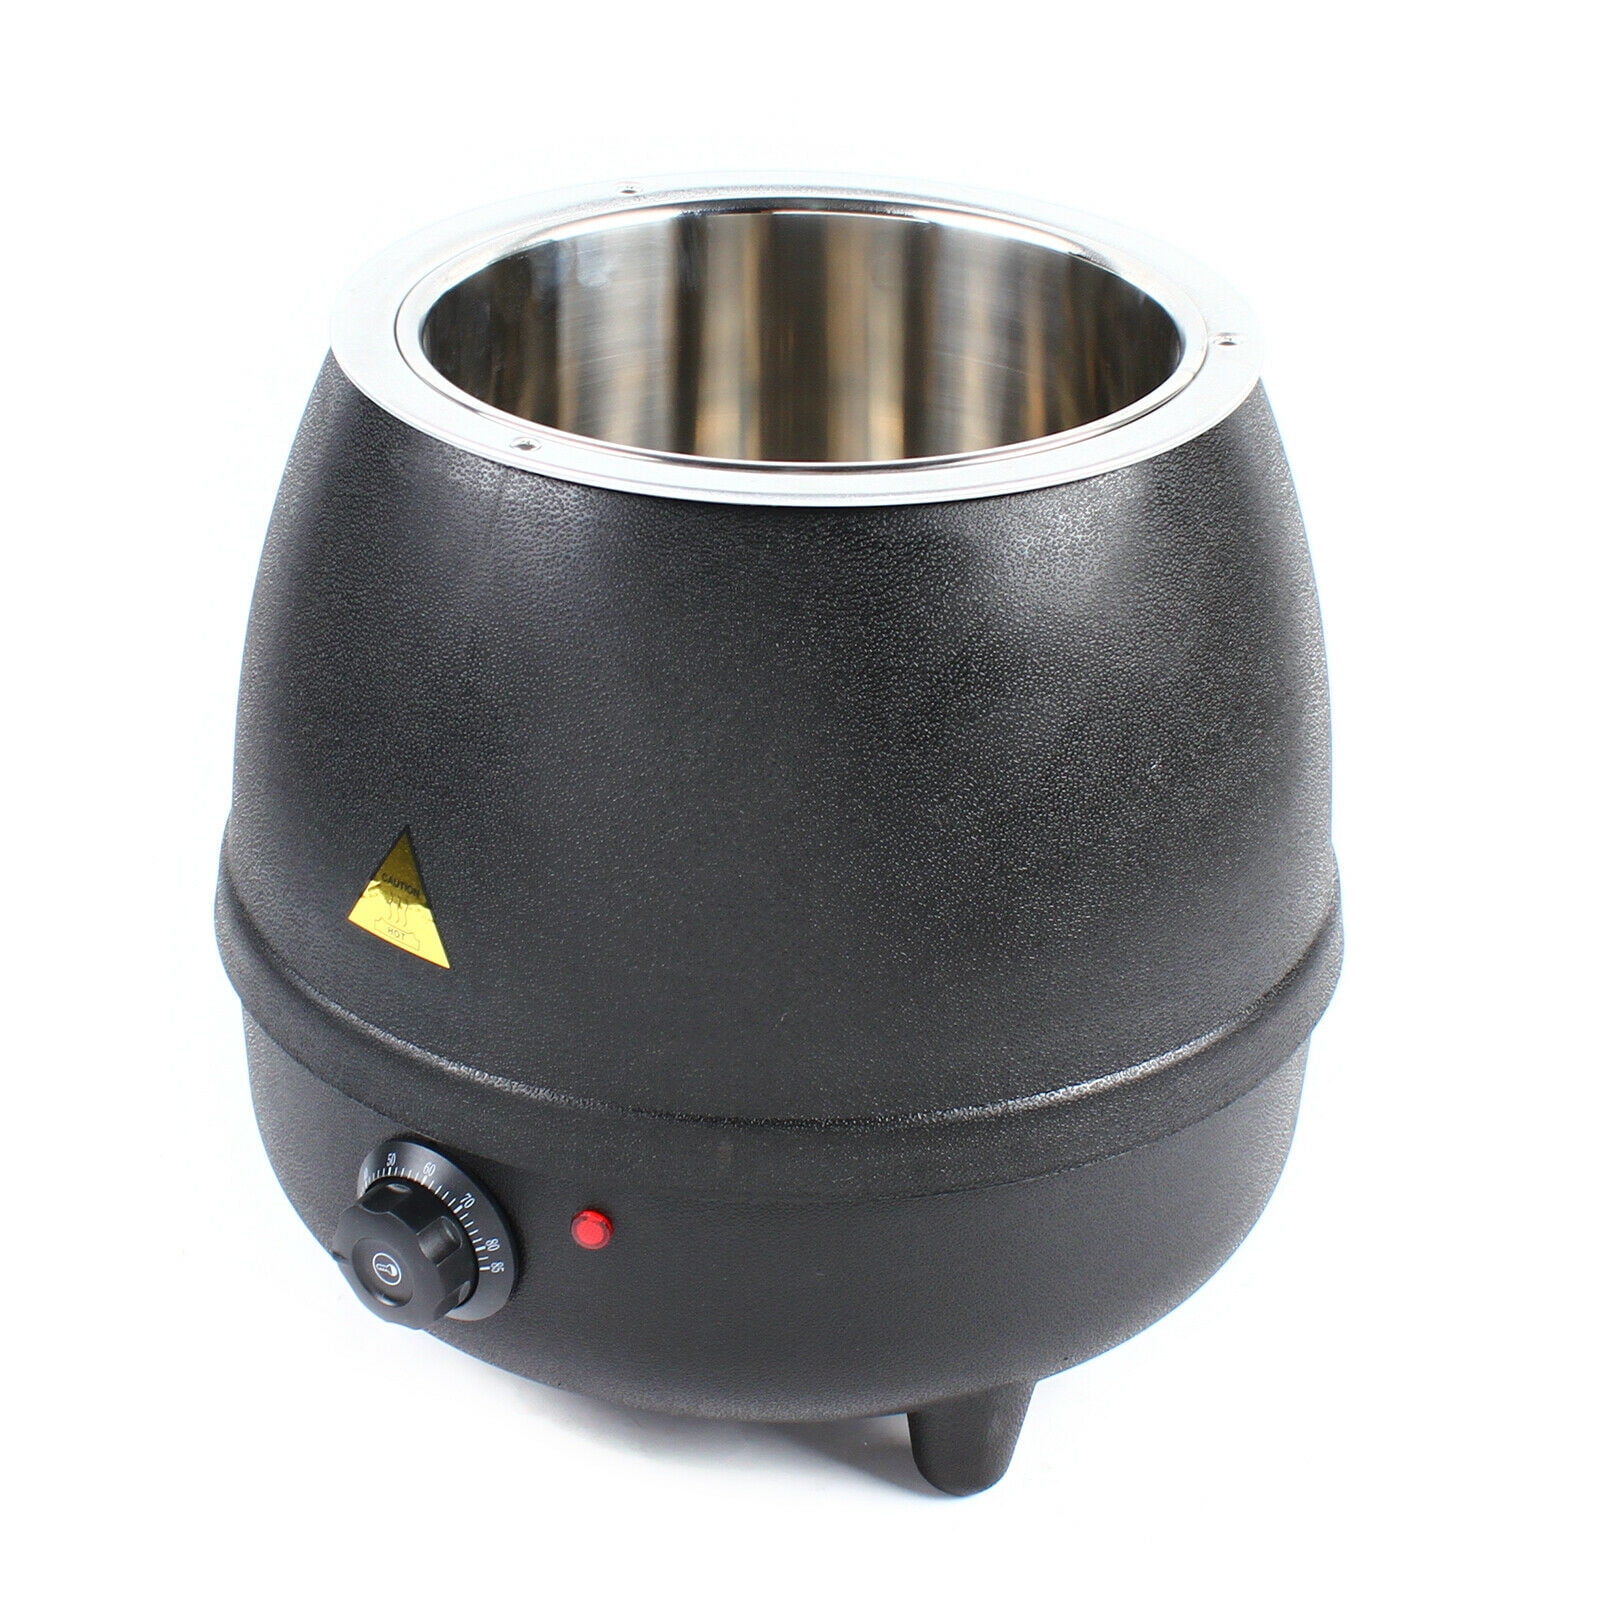  304 Stainless Steel Soup Kettle Food Buffet Warmer Machine, 10L  Electric Portable Design Soup Warmer Pot, for Restaurant Gravy and Soup,Red  : Home & Kitchen